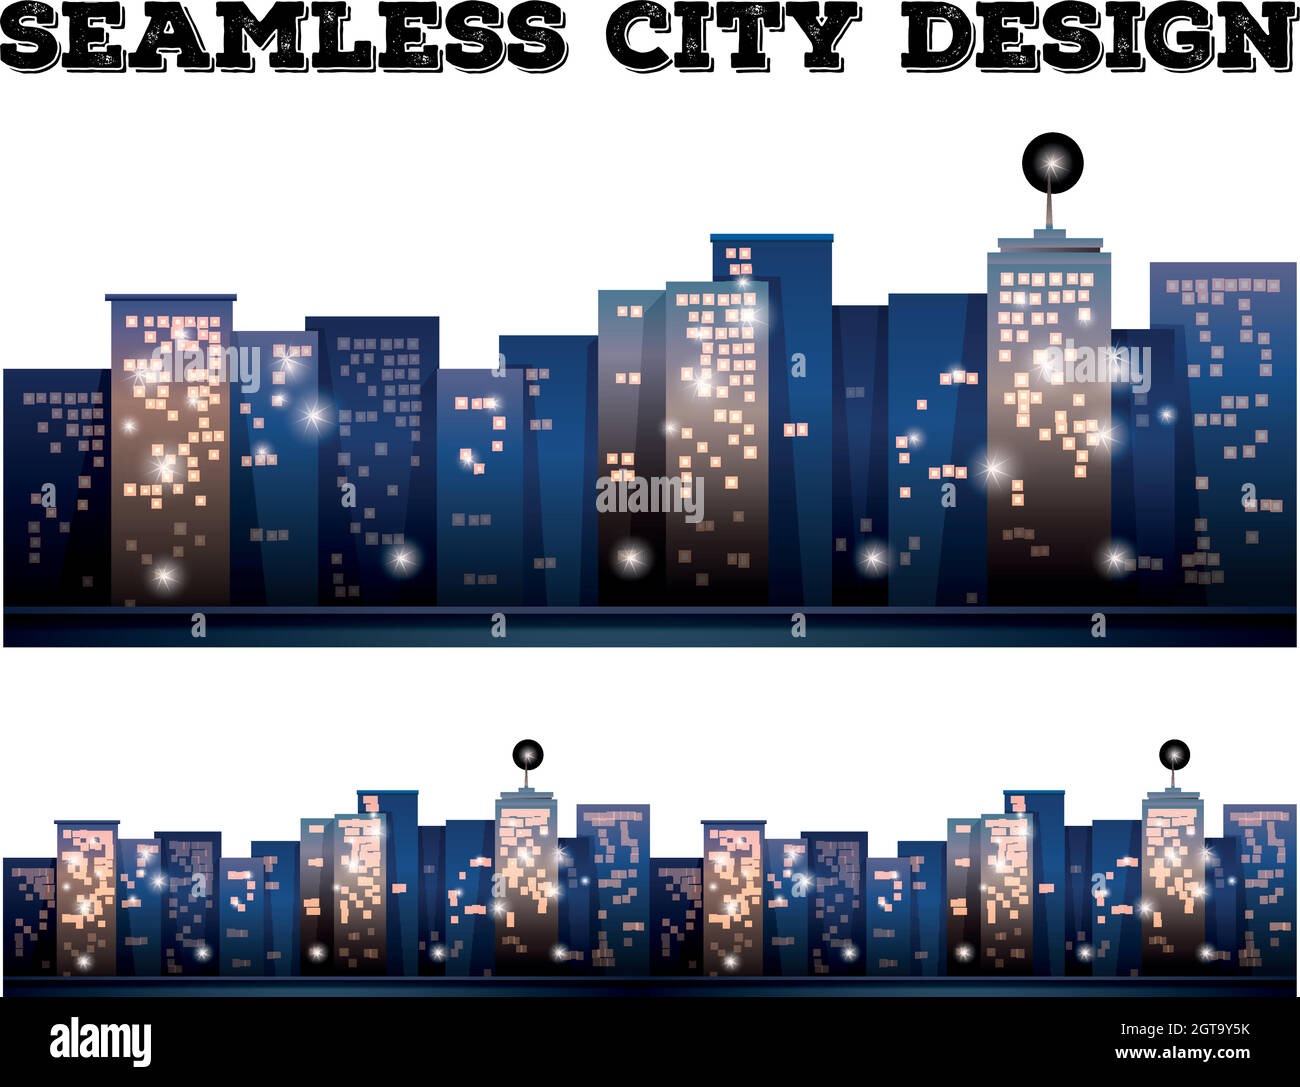 Seamless city buildings with light on Stock Vector